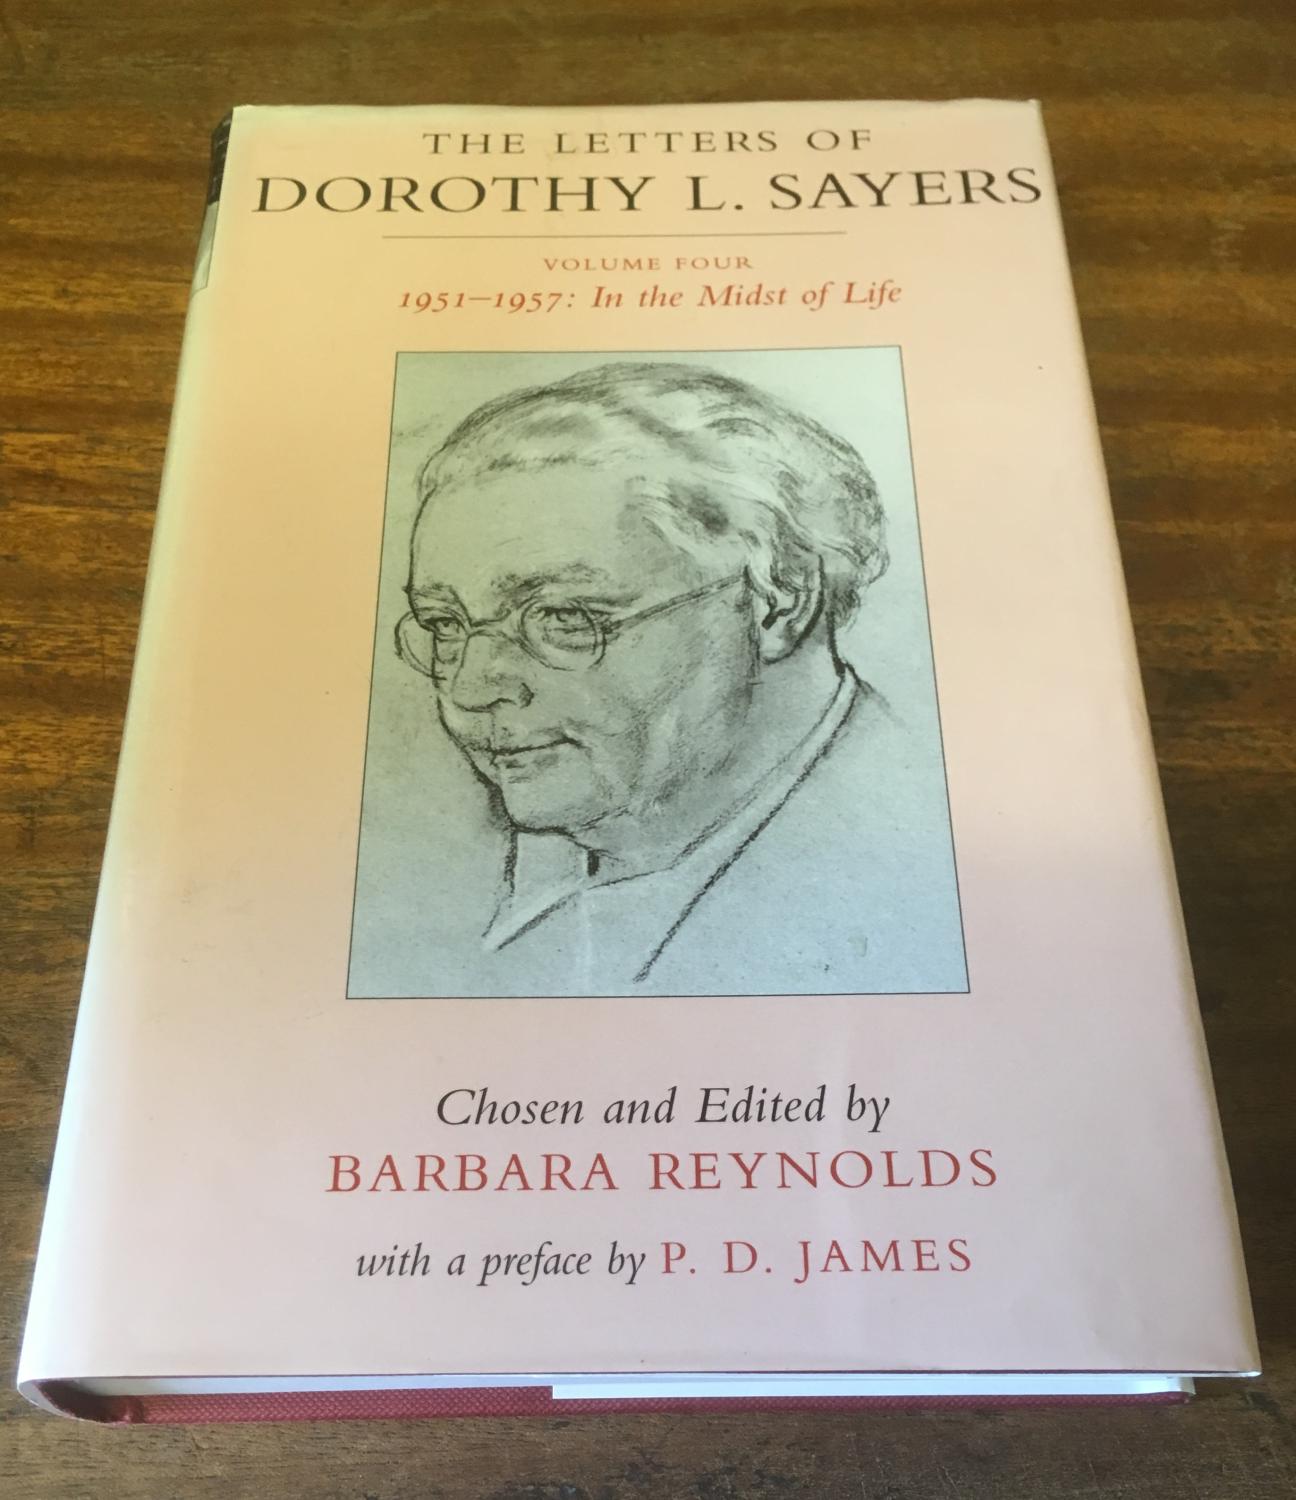 The Letters of Dorothy L.Sayers: 1951-1957 v.4: 1951-1957 Vol 4 - Sayers, Dorothy L.